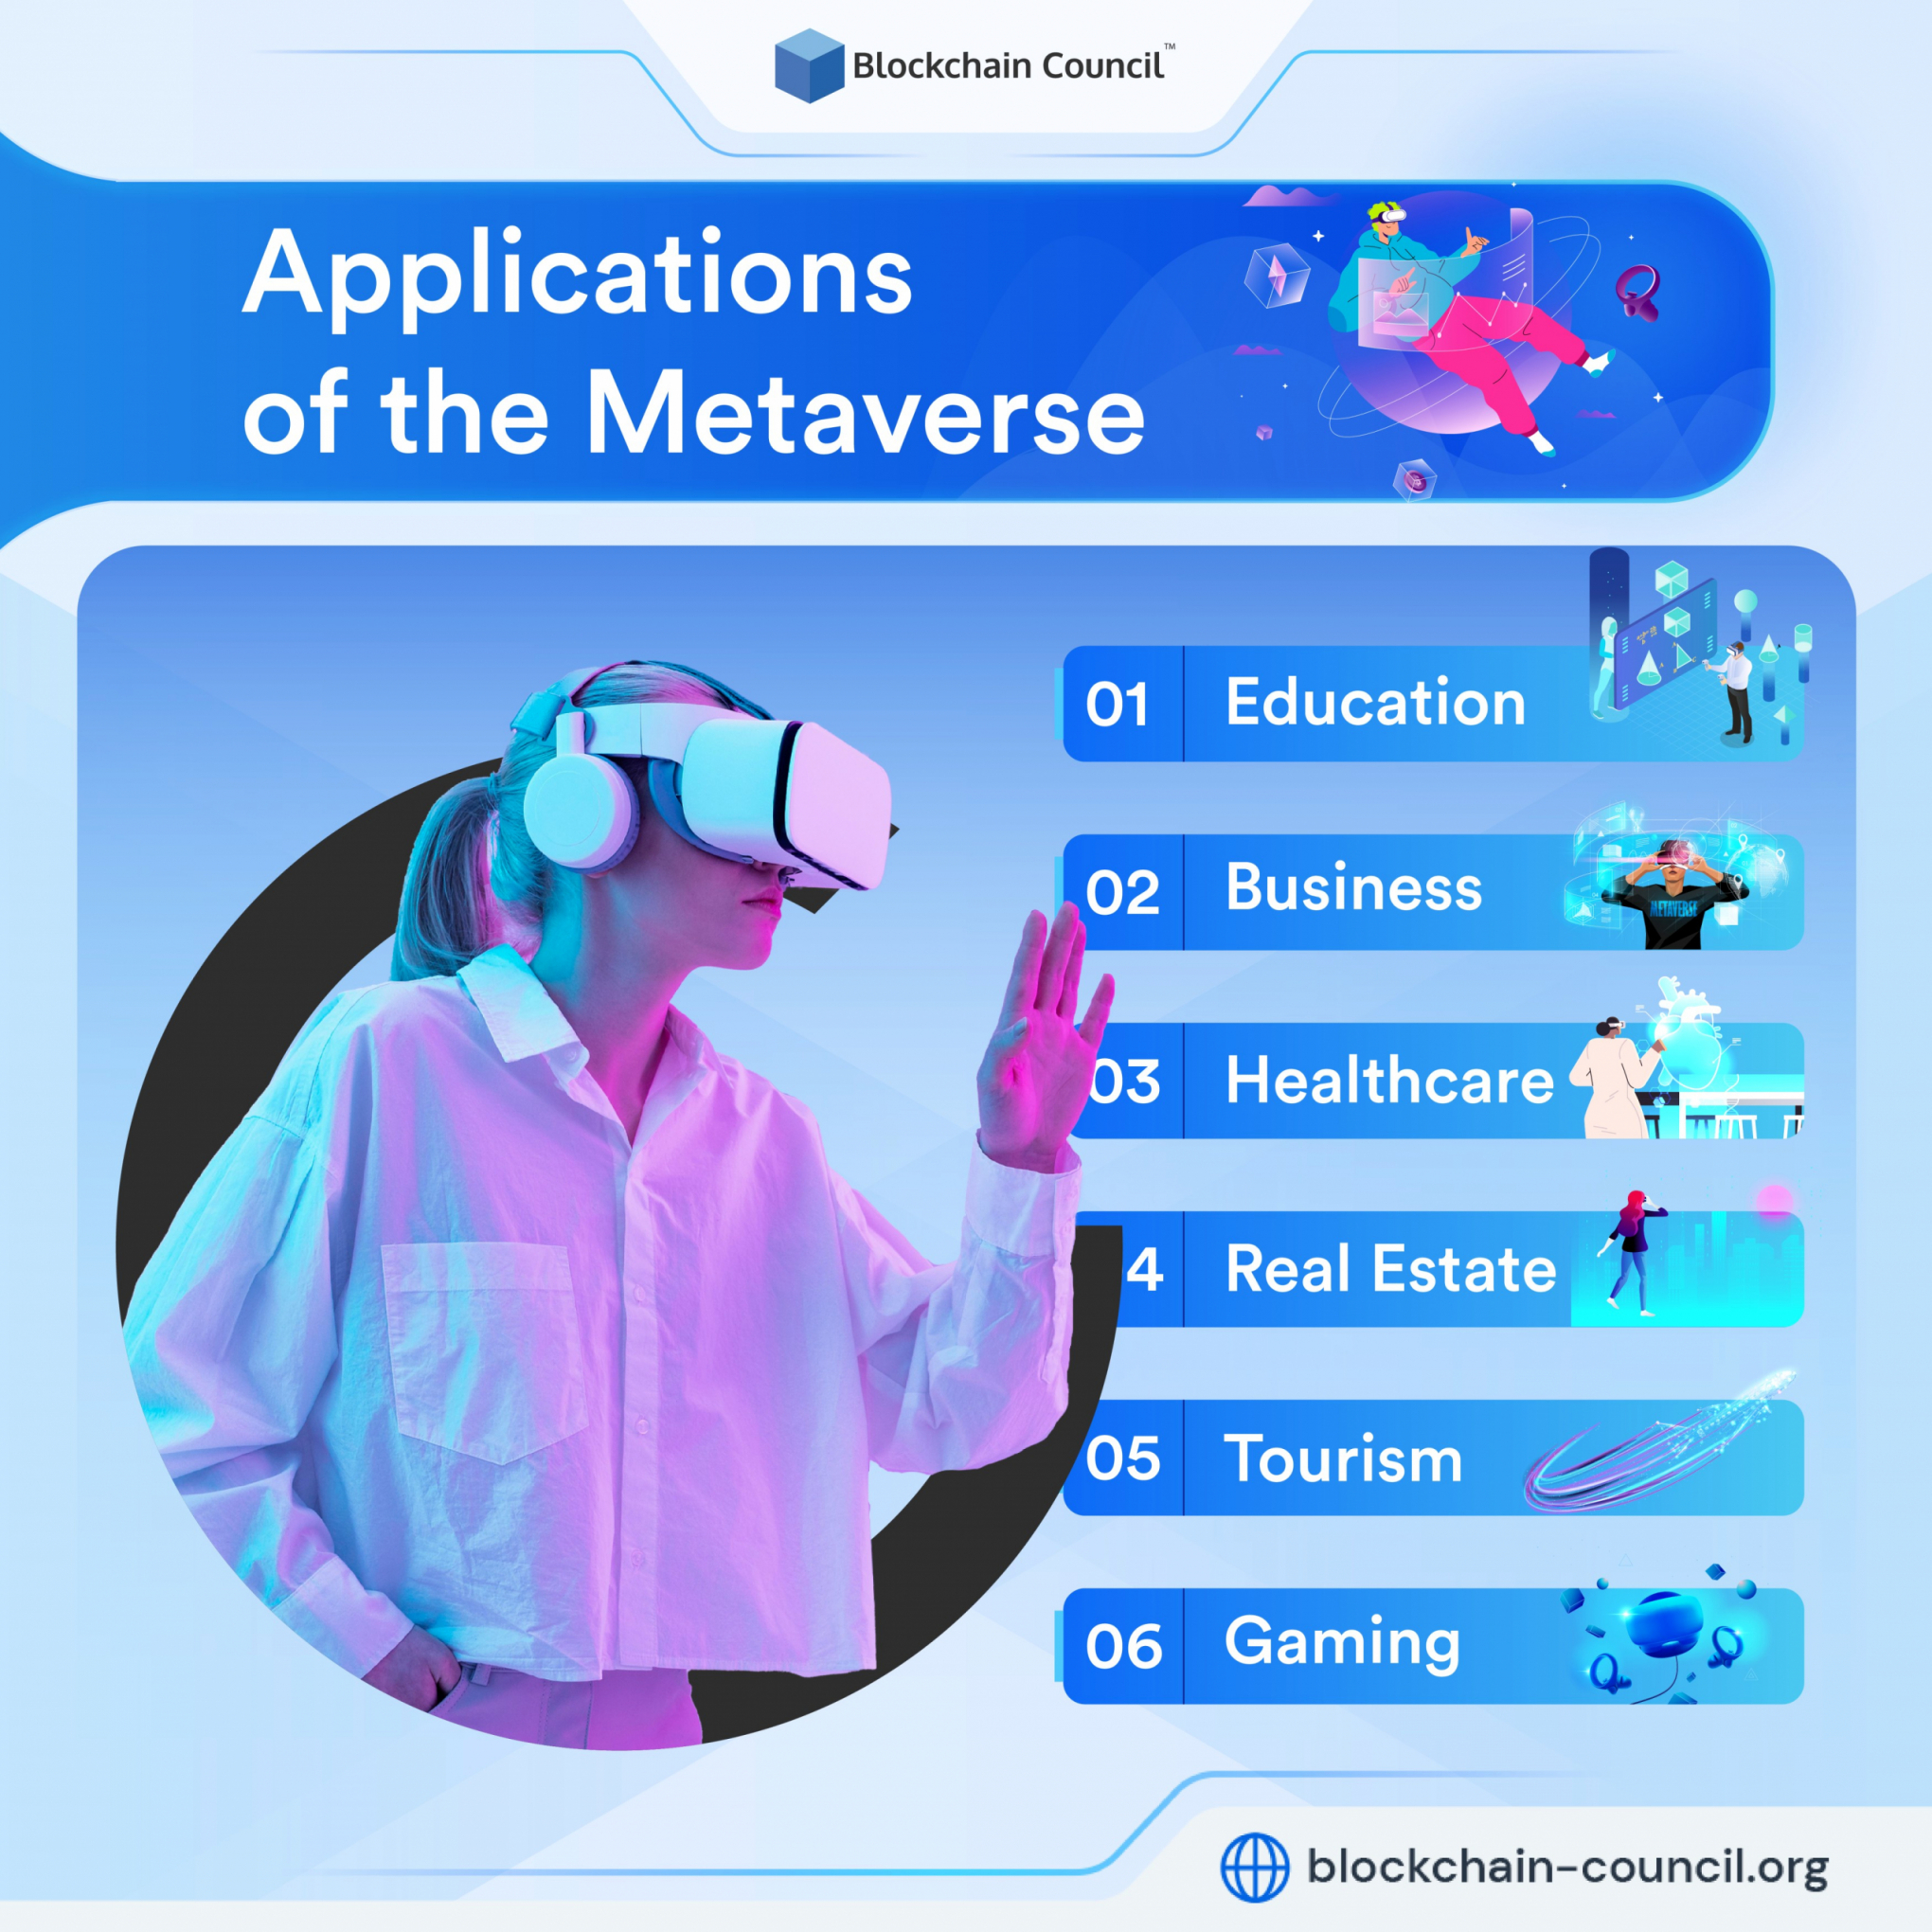 Applications of the Metaverse